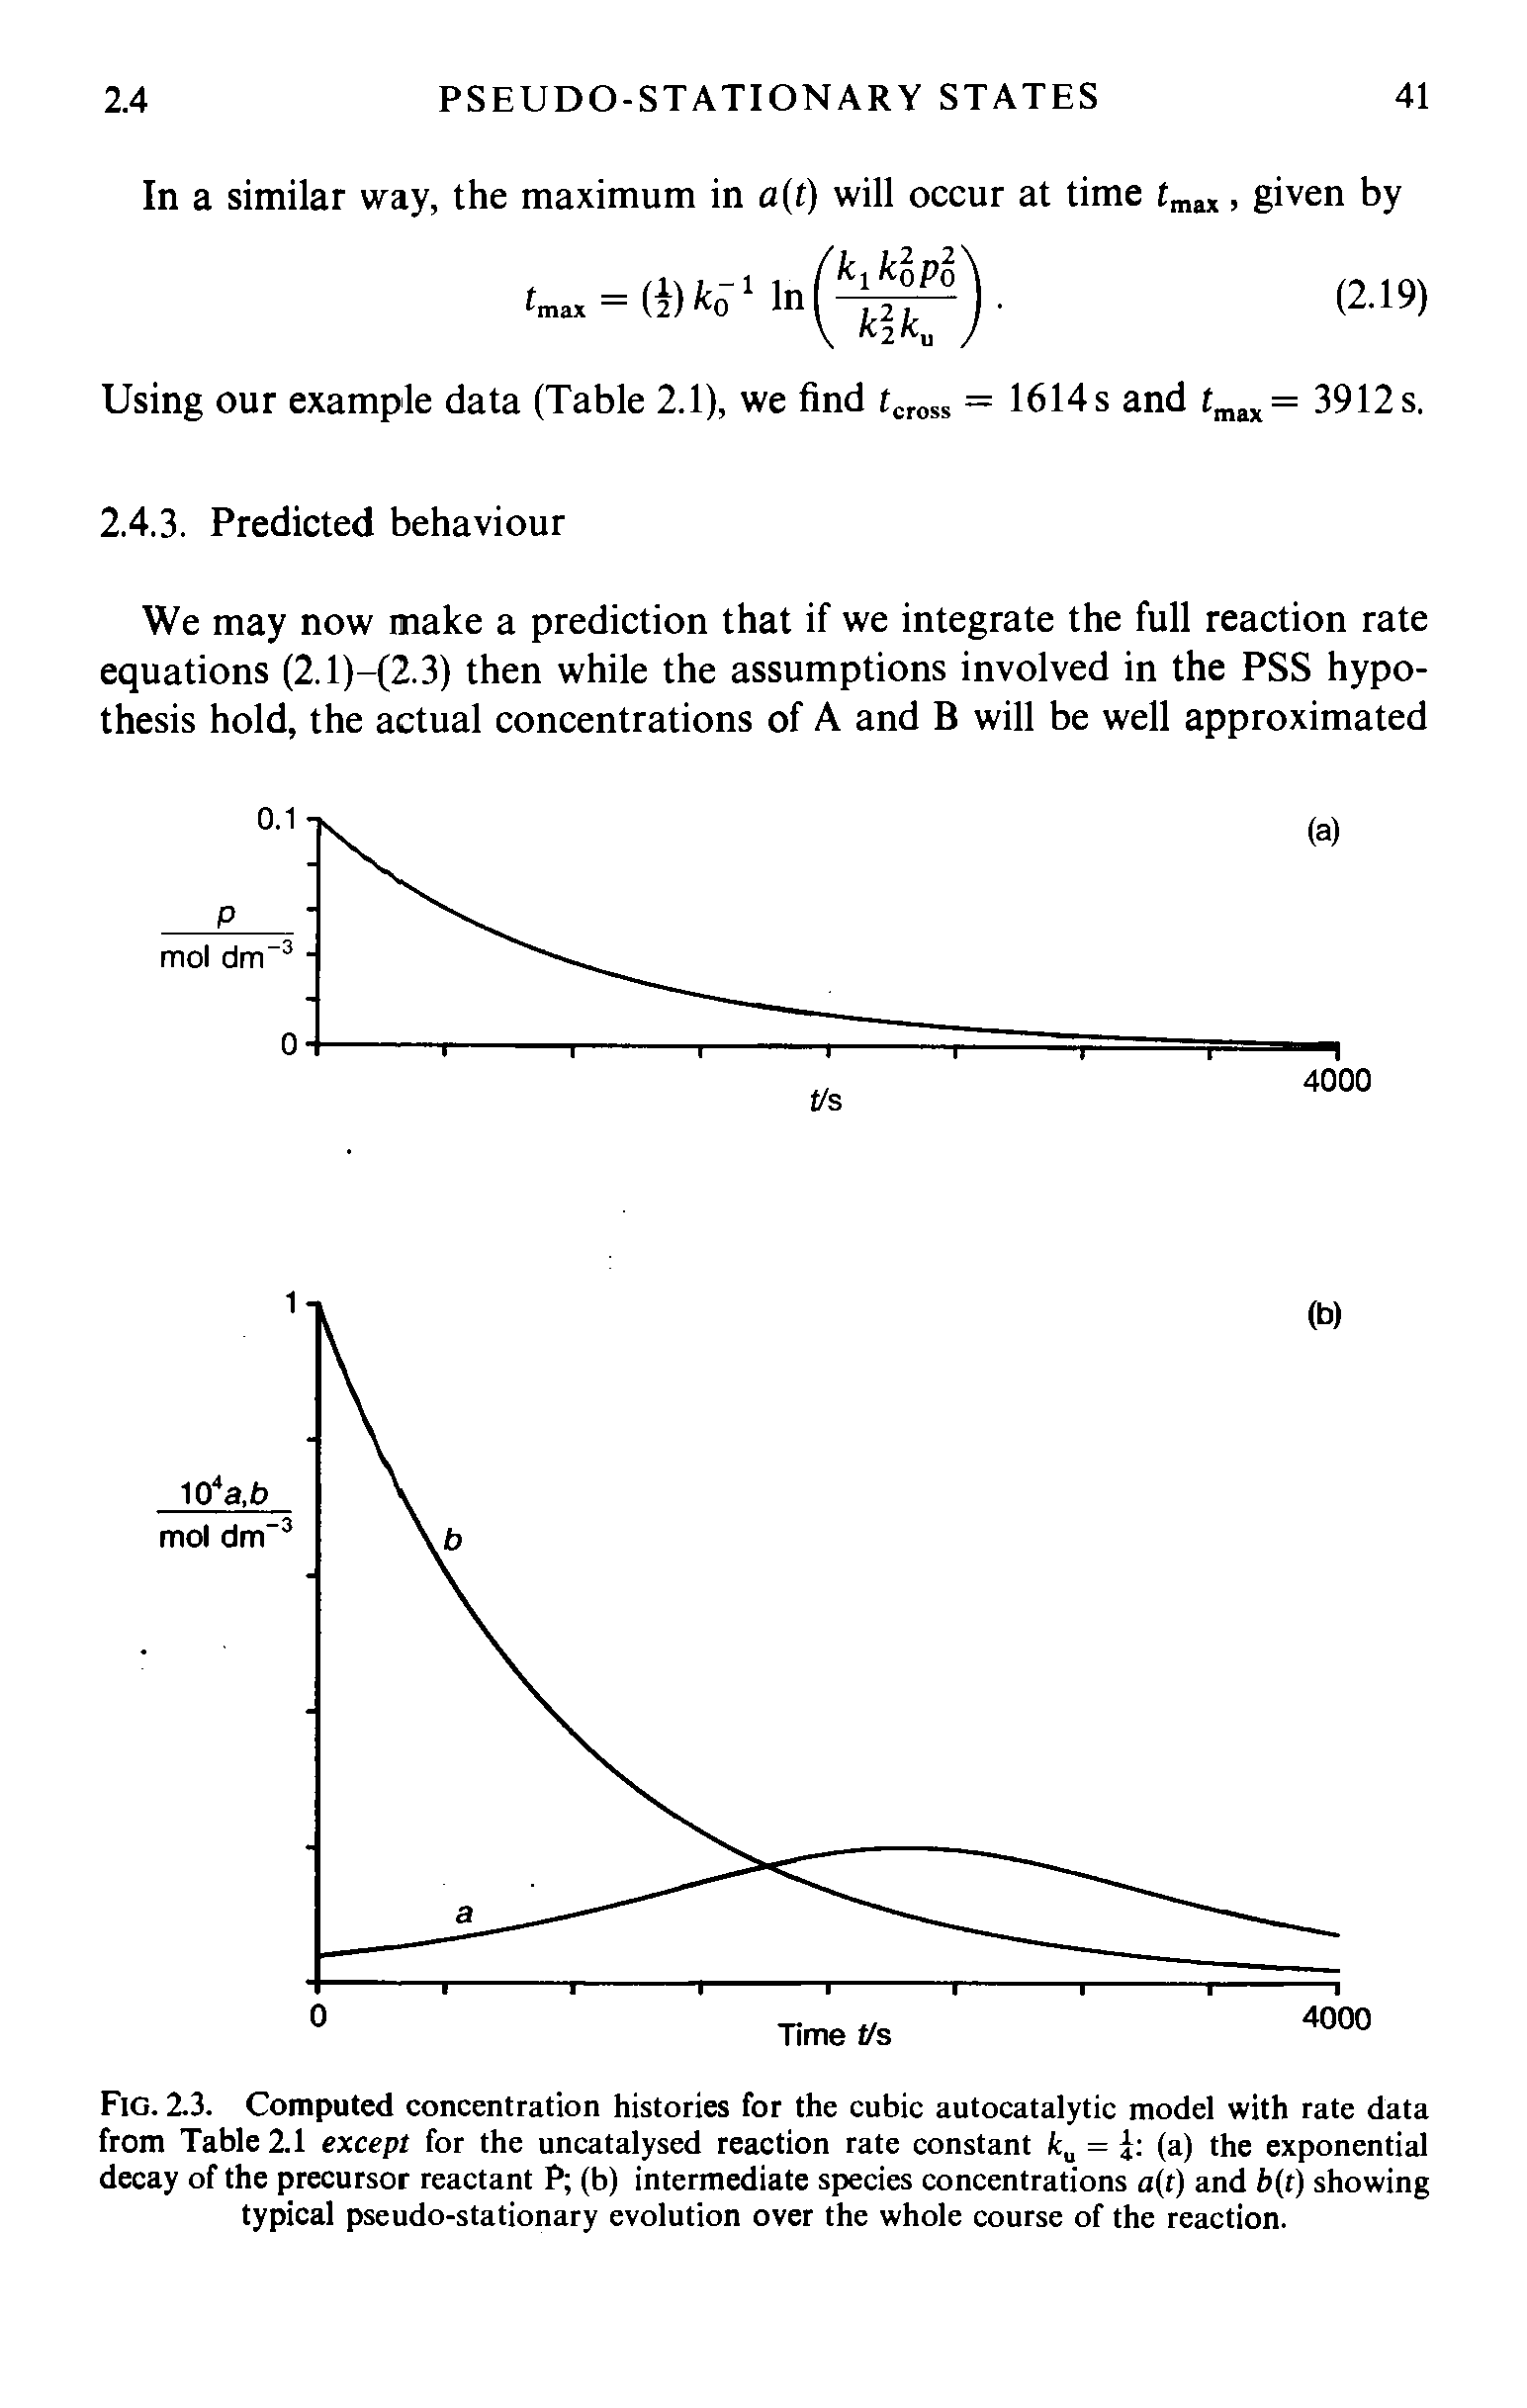 Fig. 2.3. Computed concentration histories for the cubic autocatalytic model with rate data from Table 2.1 except for the uncatalysed reaction rate constant feu = (a) the exponential...